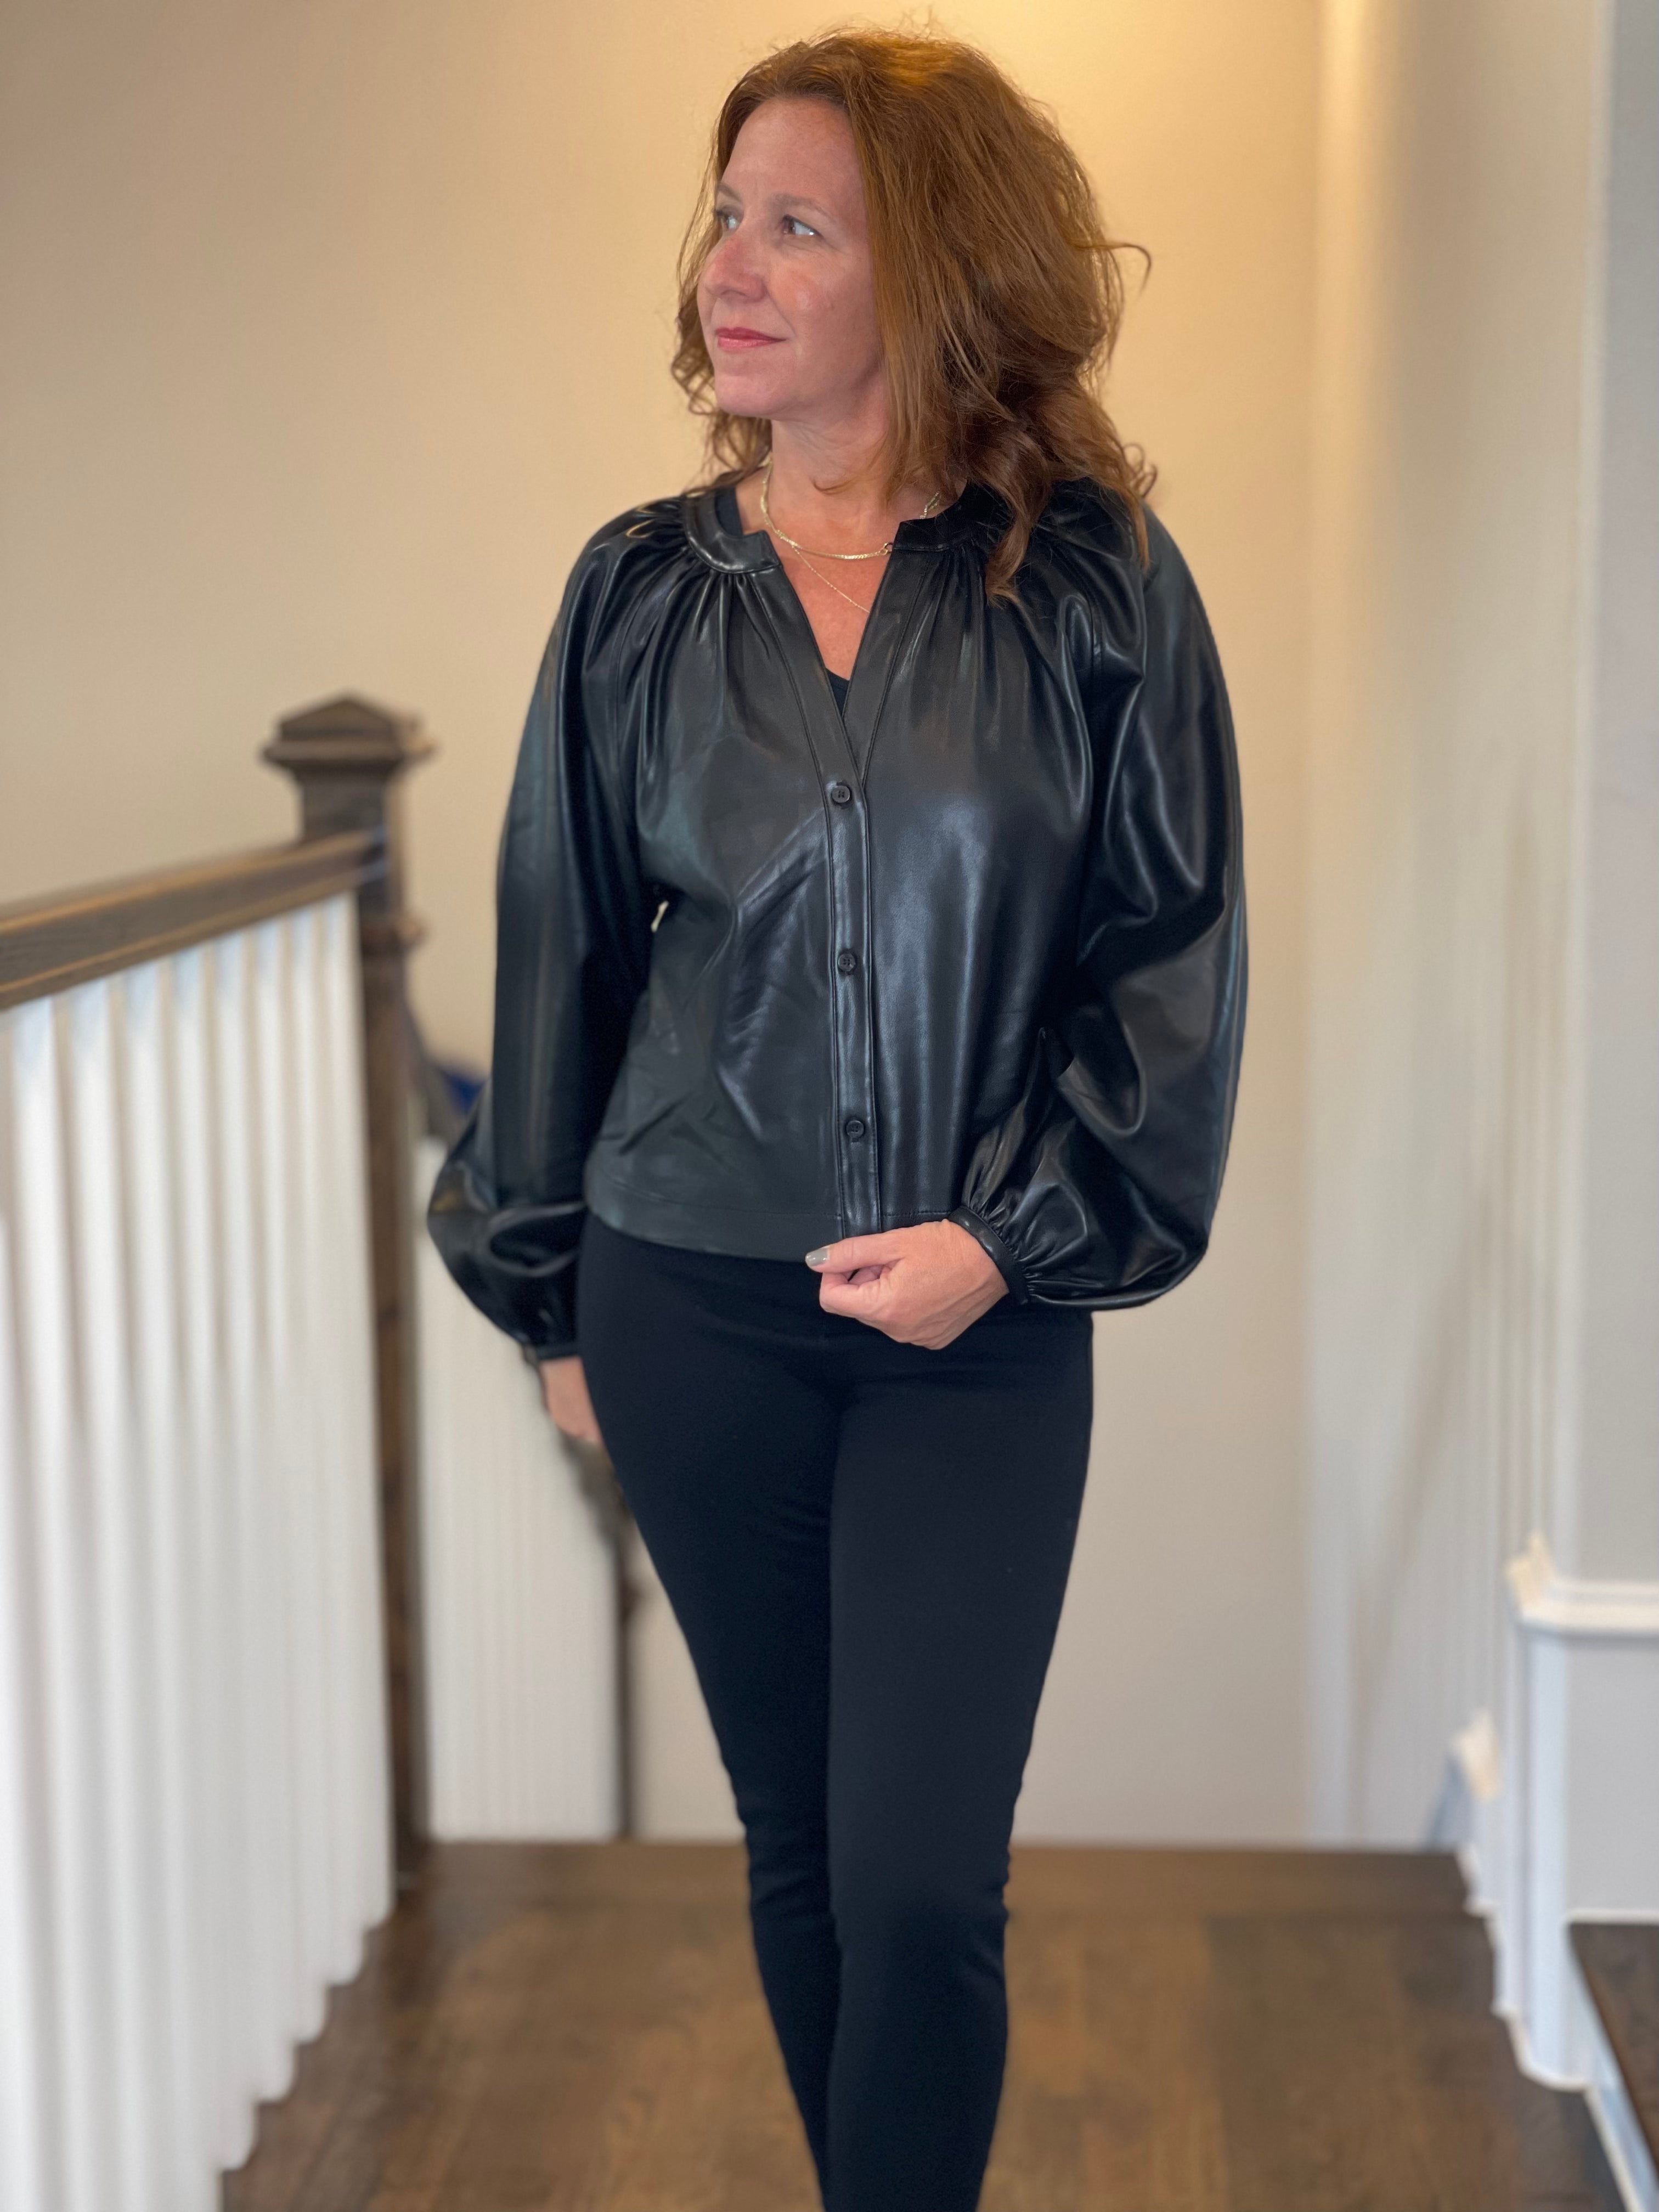 Vegan Leather Button Down Peasant Top in Black.